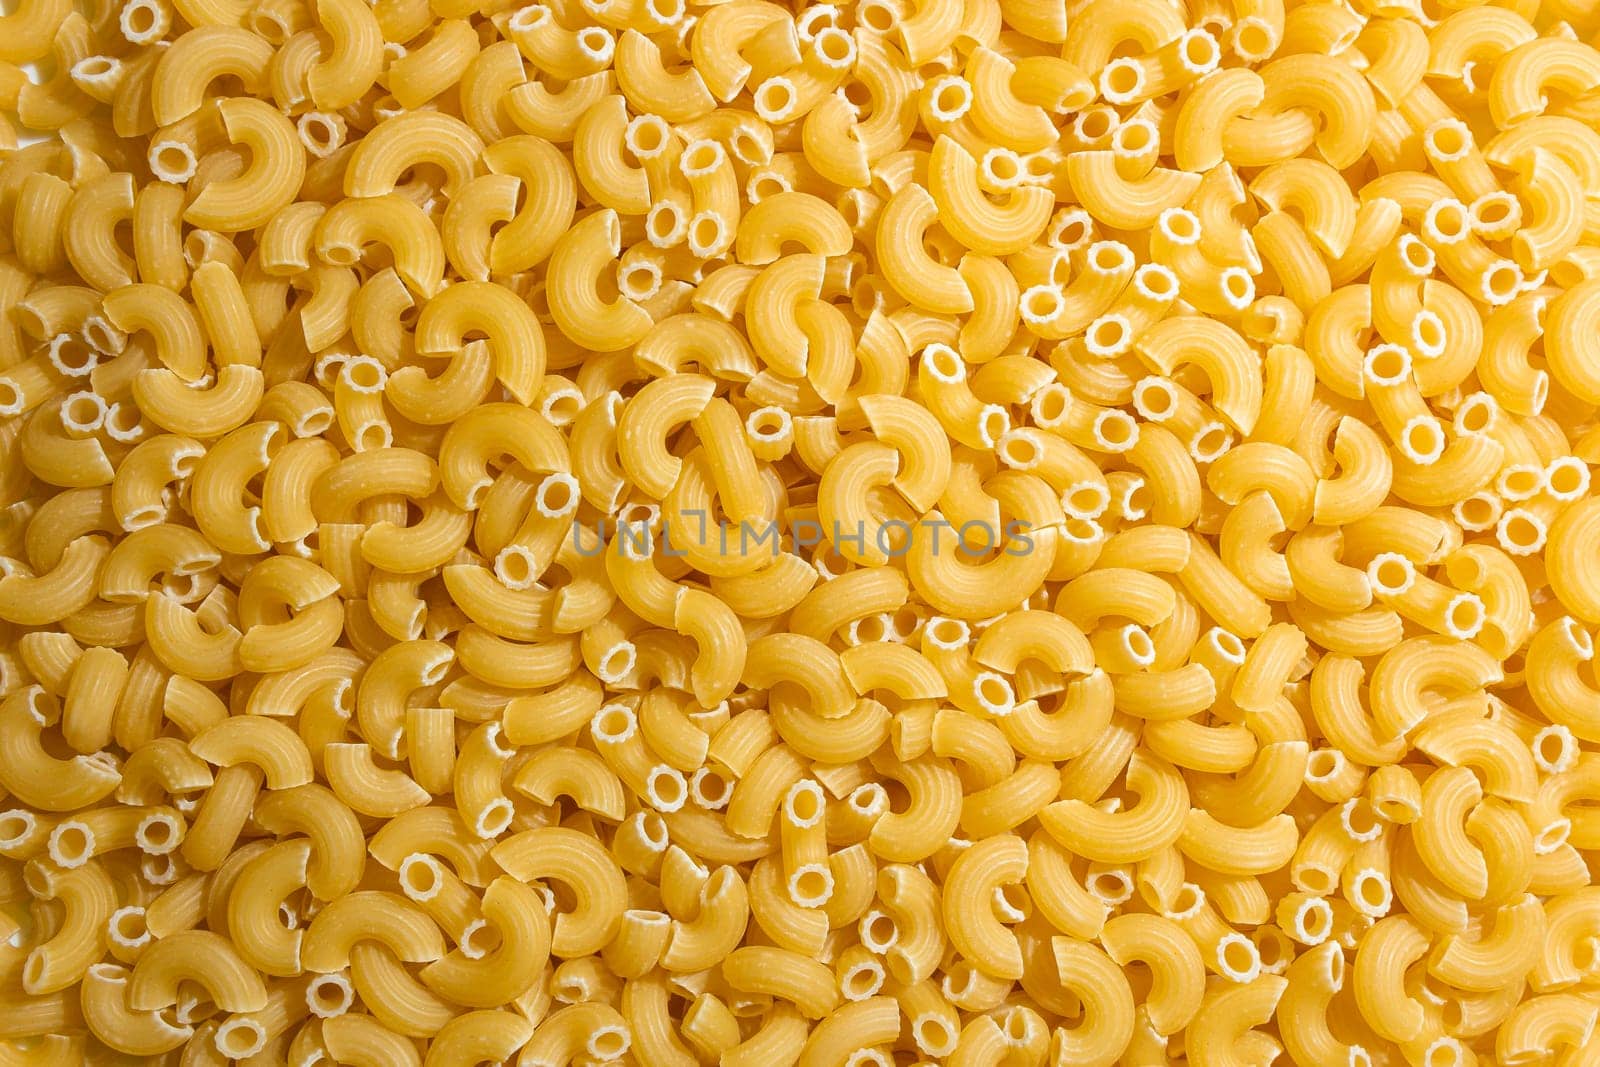 Uncooked Chifferi Rigati Pasta: A Culinary Canvas of Chifferi Rigati, Creating a Lively and Textured Background for Gourmet Cooking. Dry Pasta. Raw Macaroni - Top View, Flat Lay